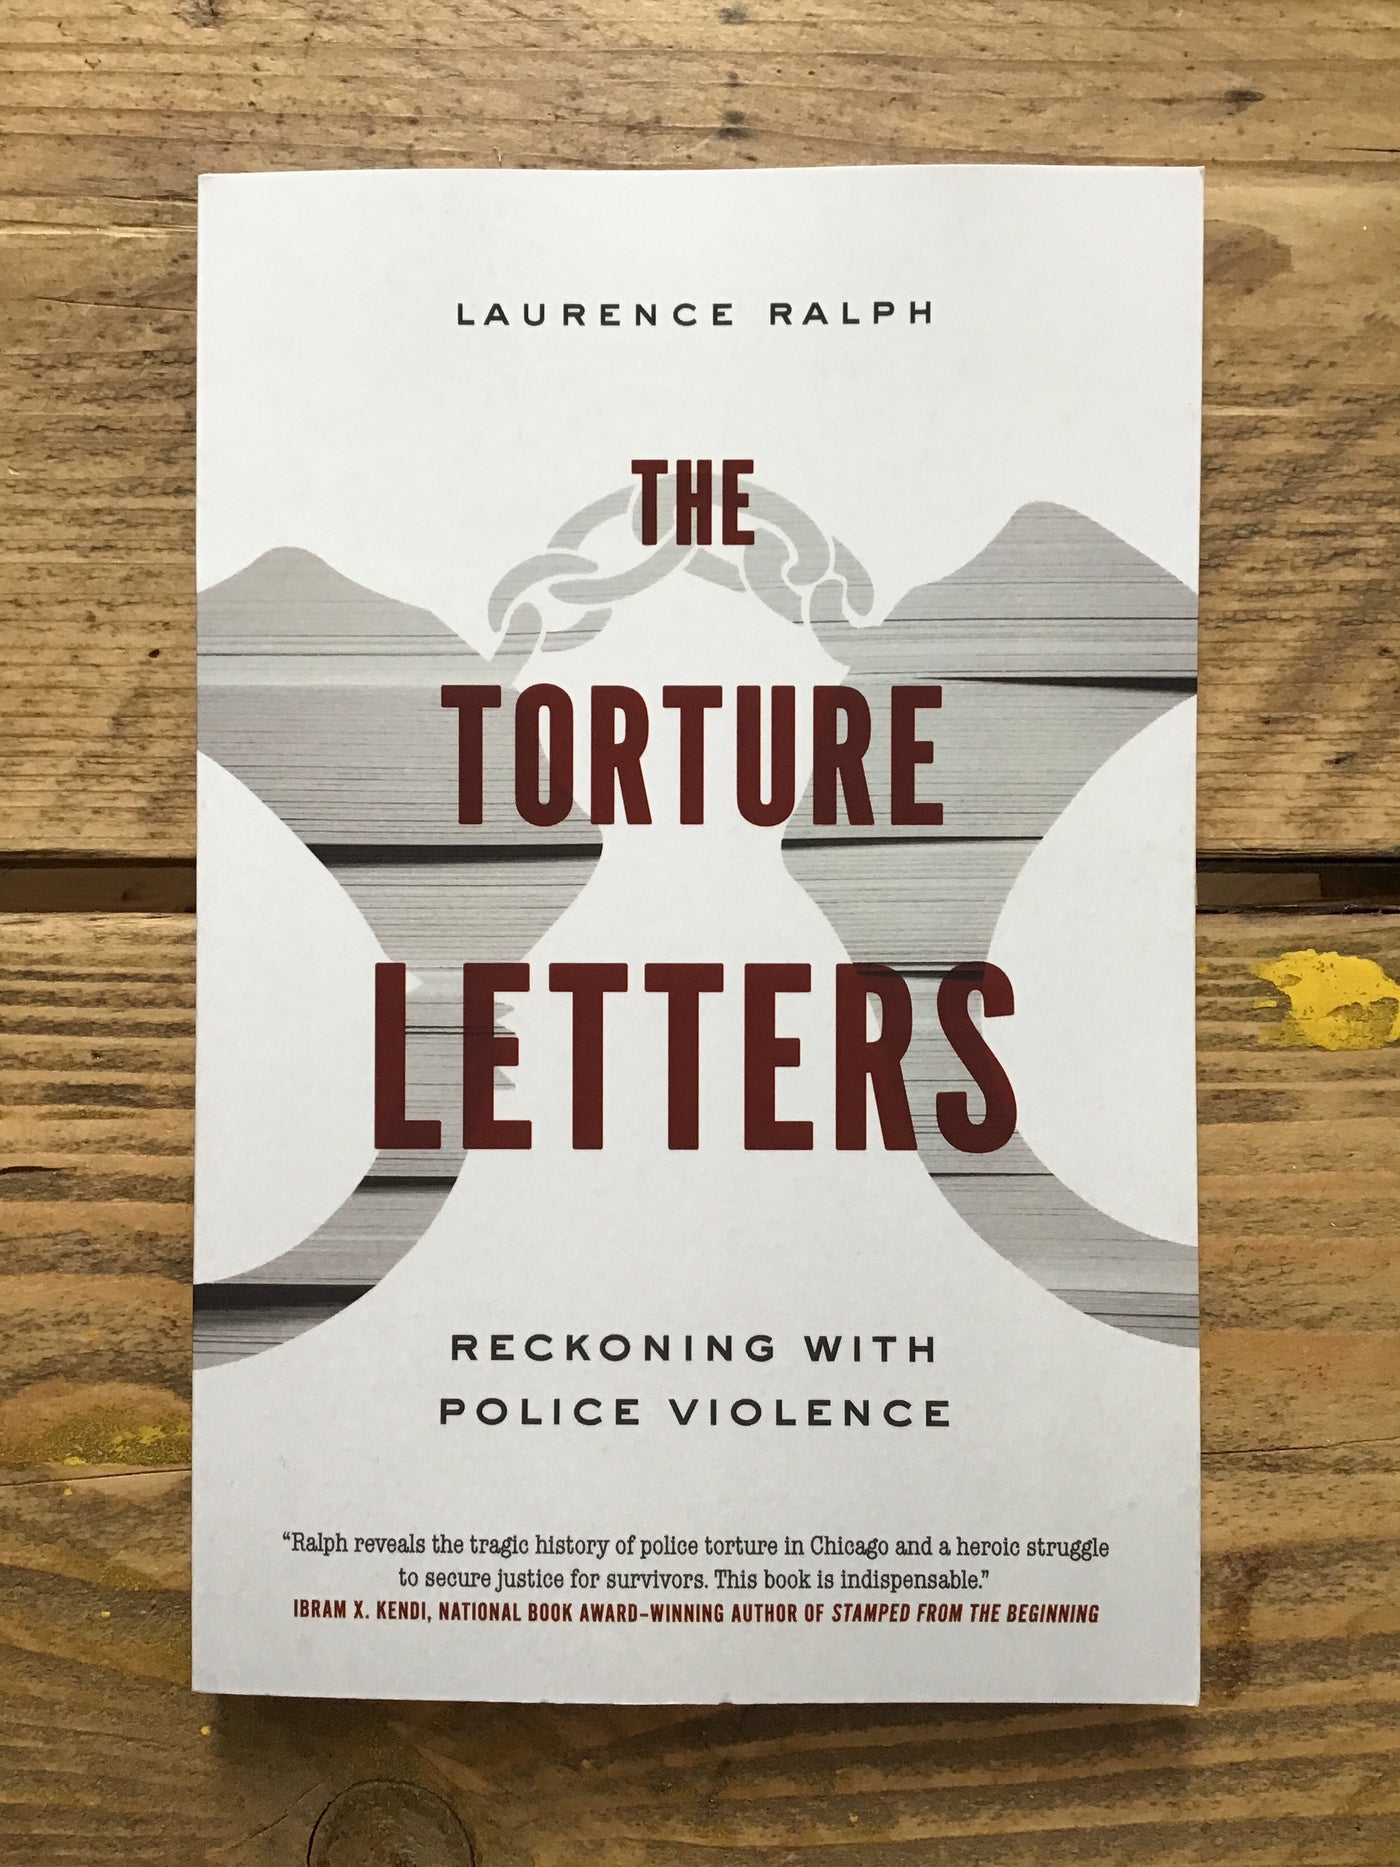 The Torture Letters